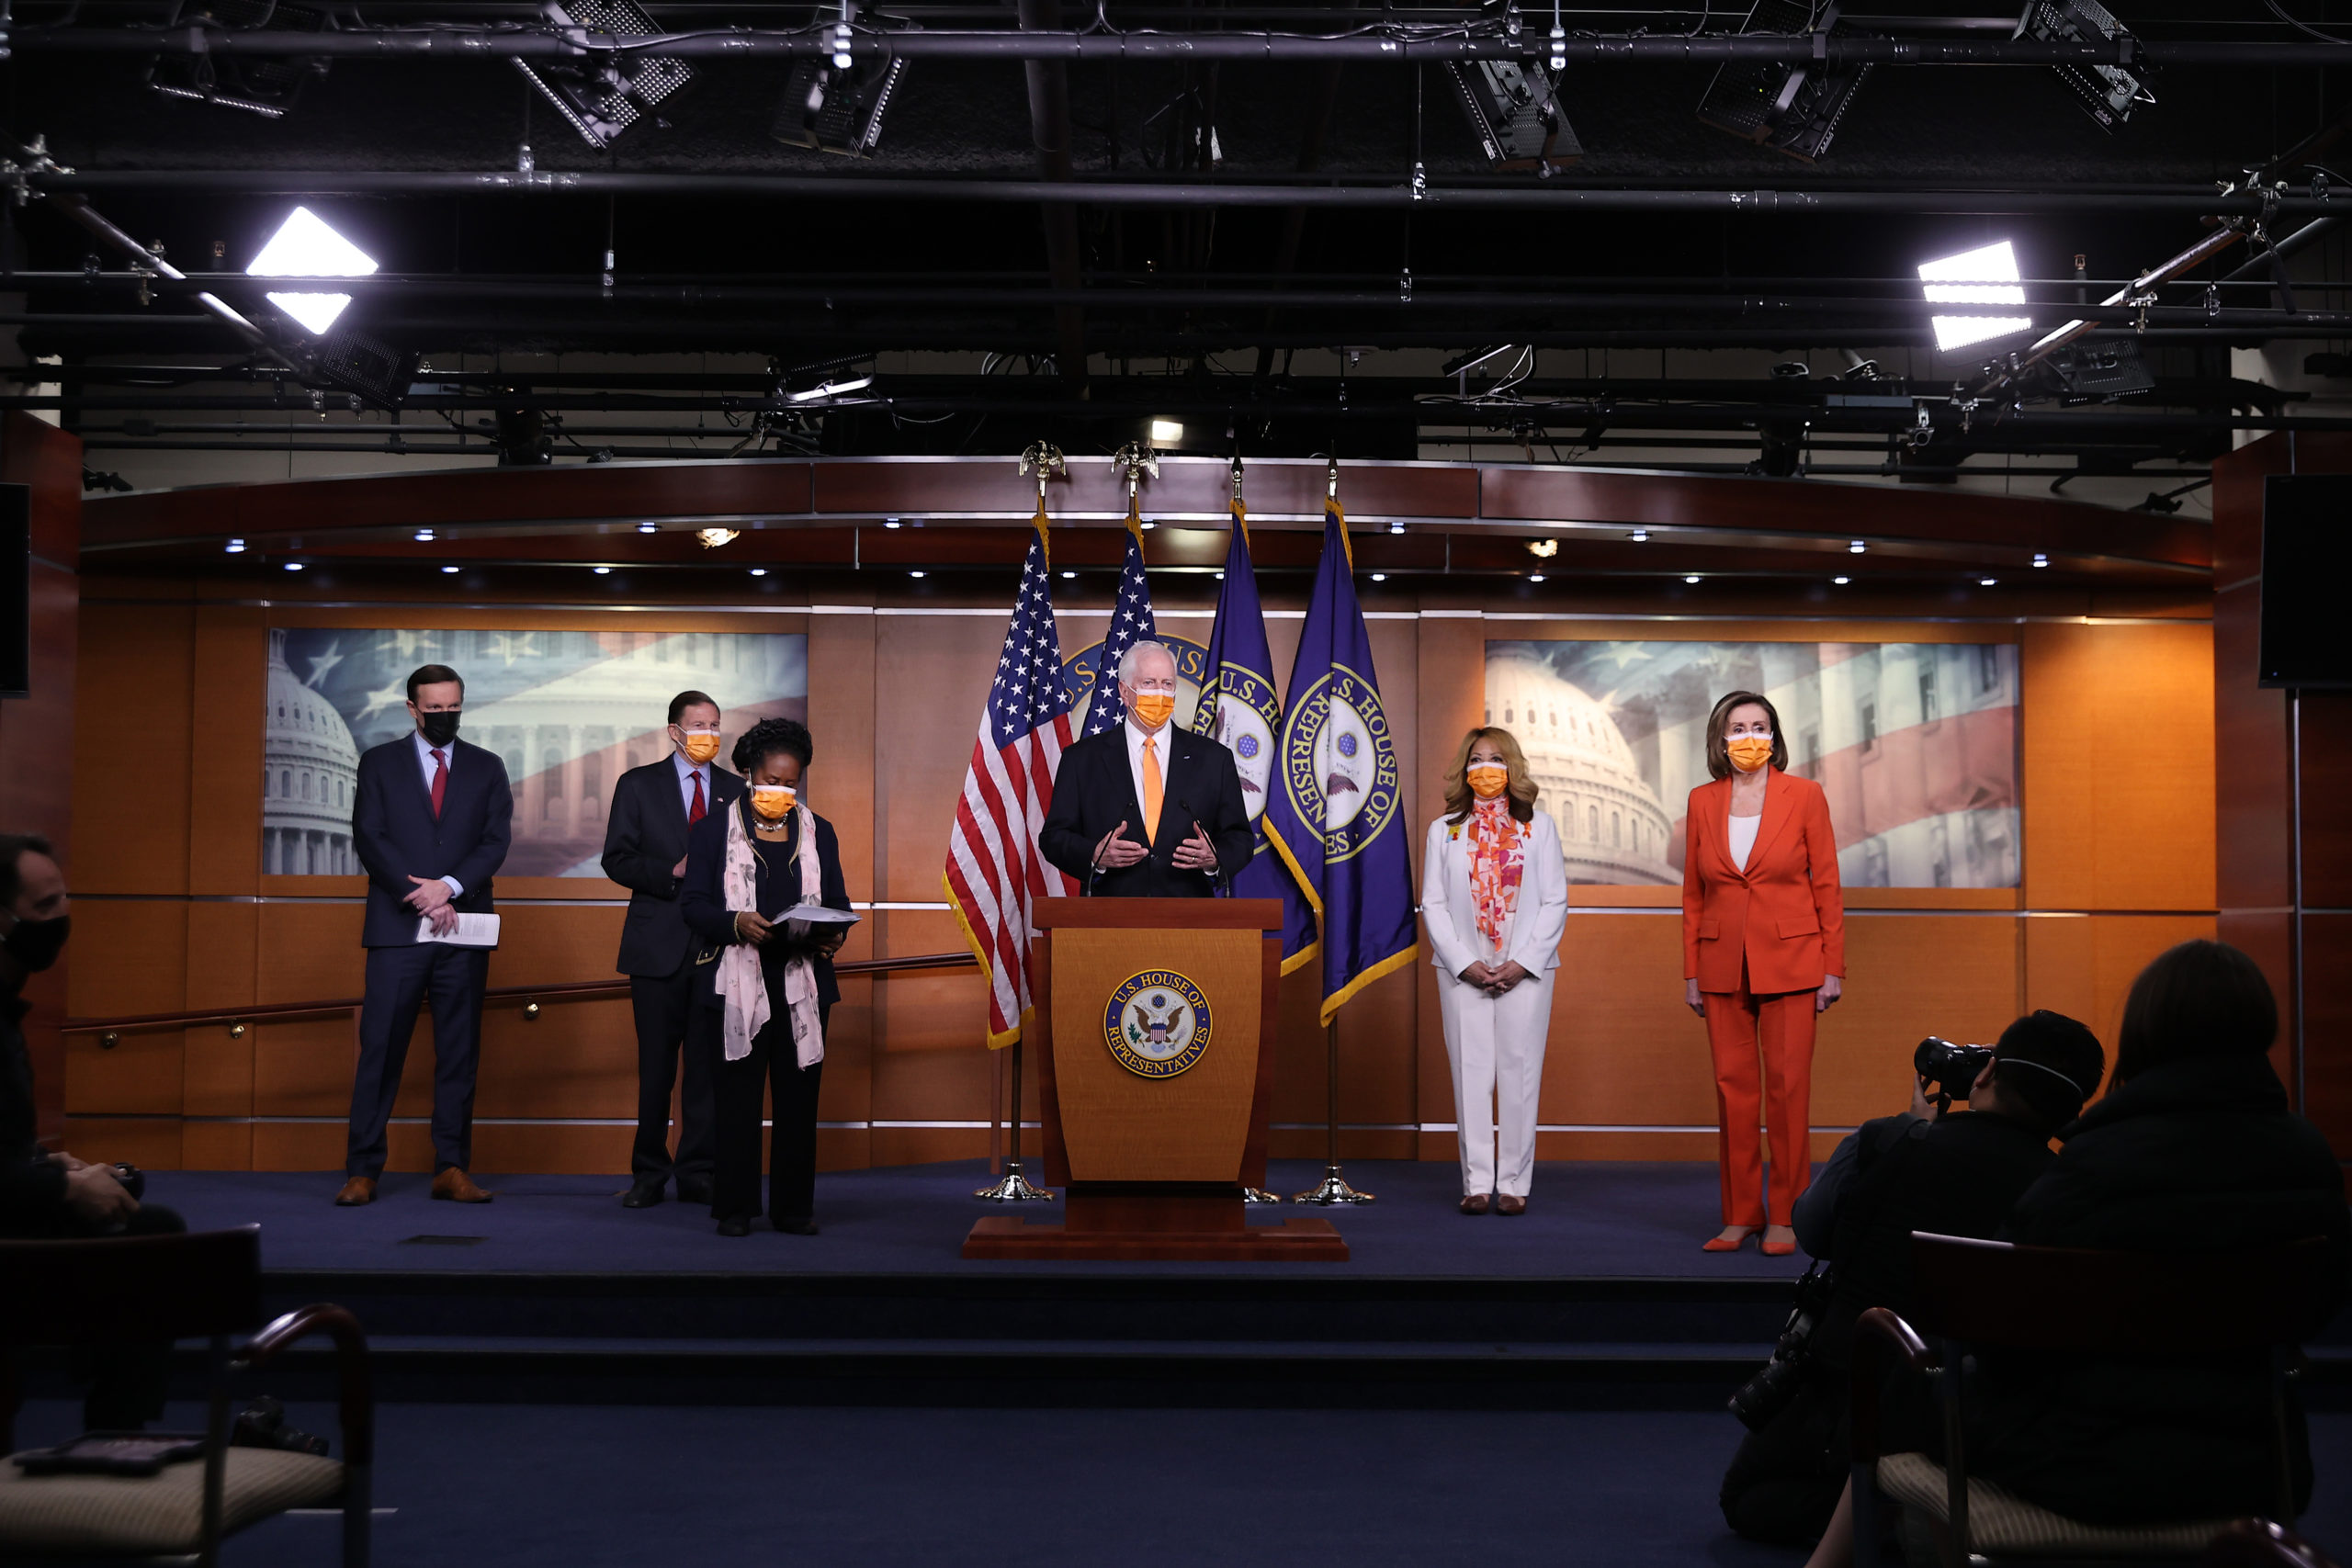 Rep. Mike Thompson speaks during a news conference on March 11, 2021 in Washington, D.C. (Chip Somodevilla/Getty Images)